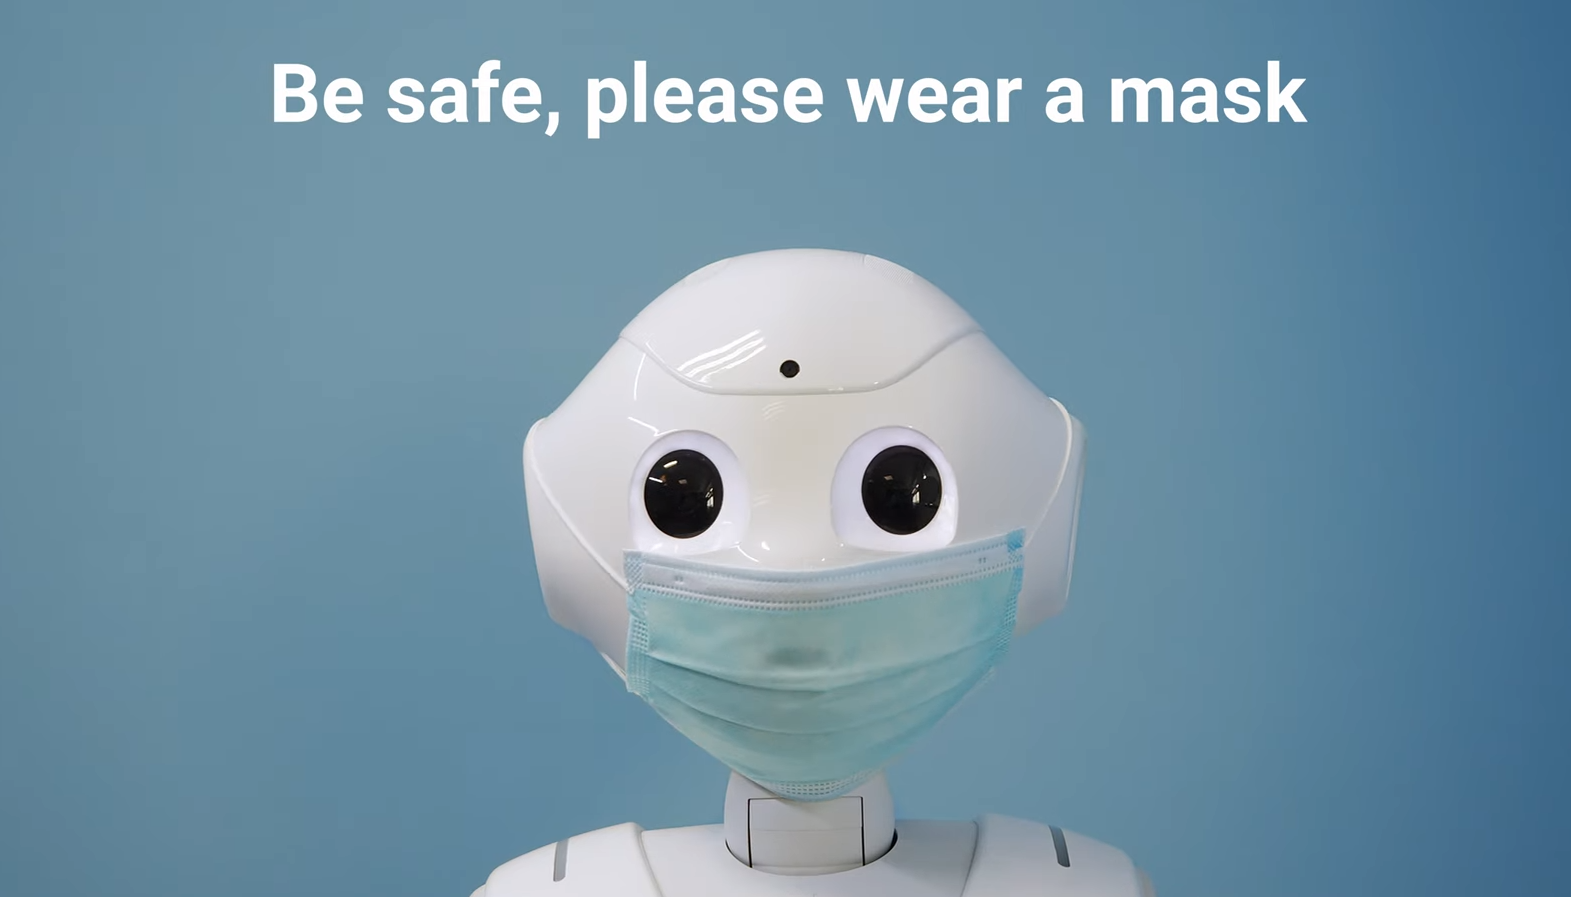 Pepper Robot Can Scan Your Face and Ask you to Wear a Face Mask